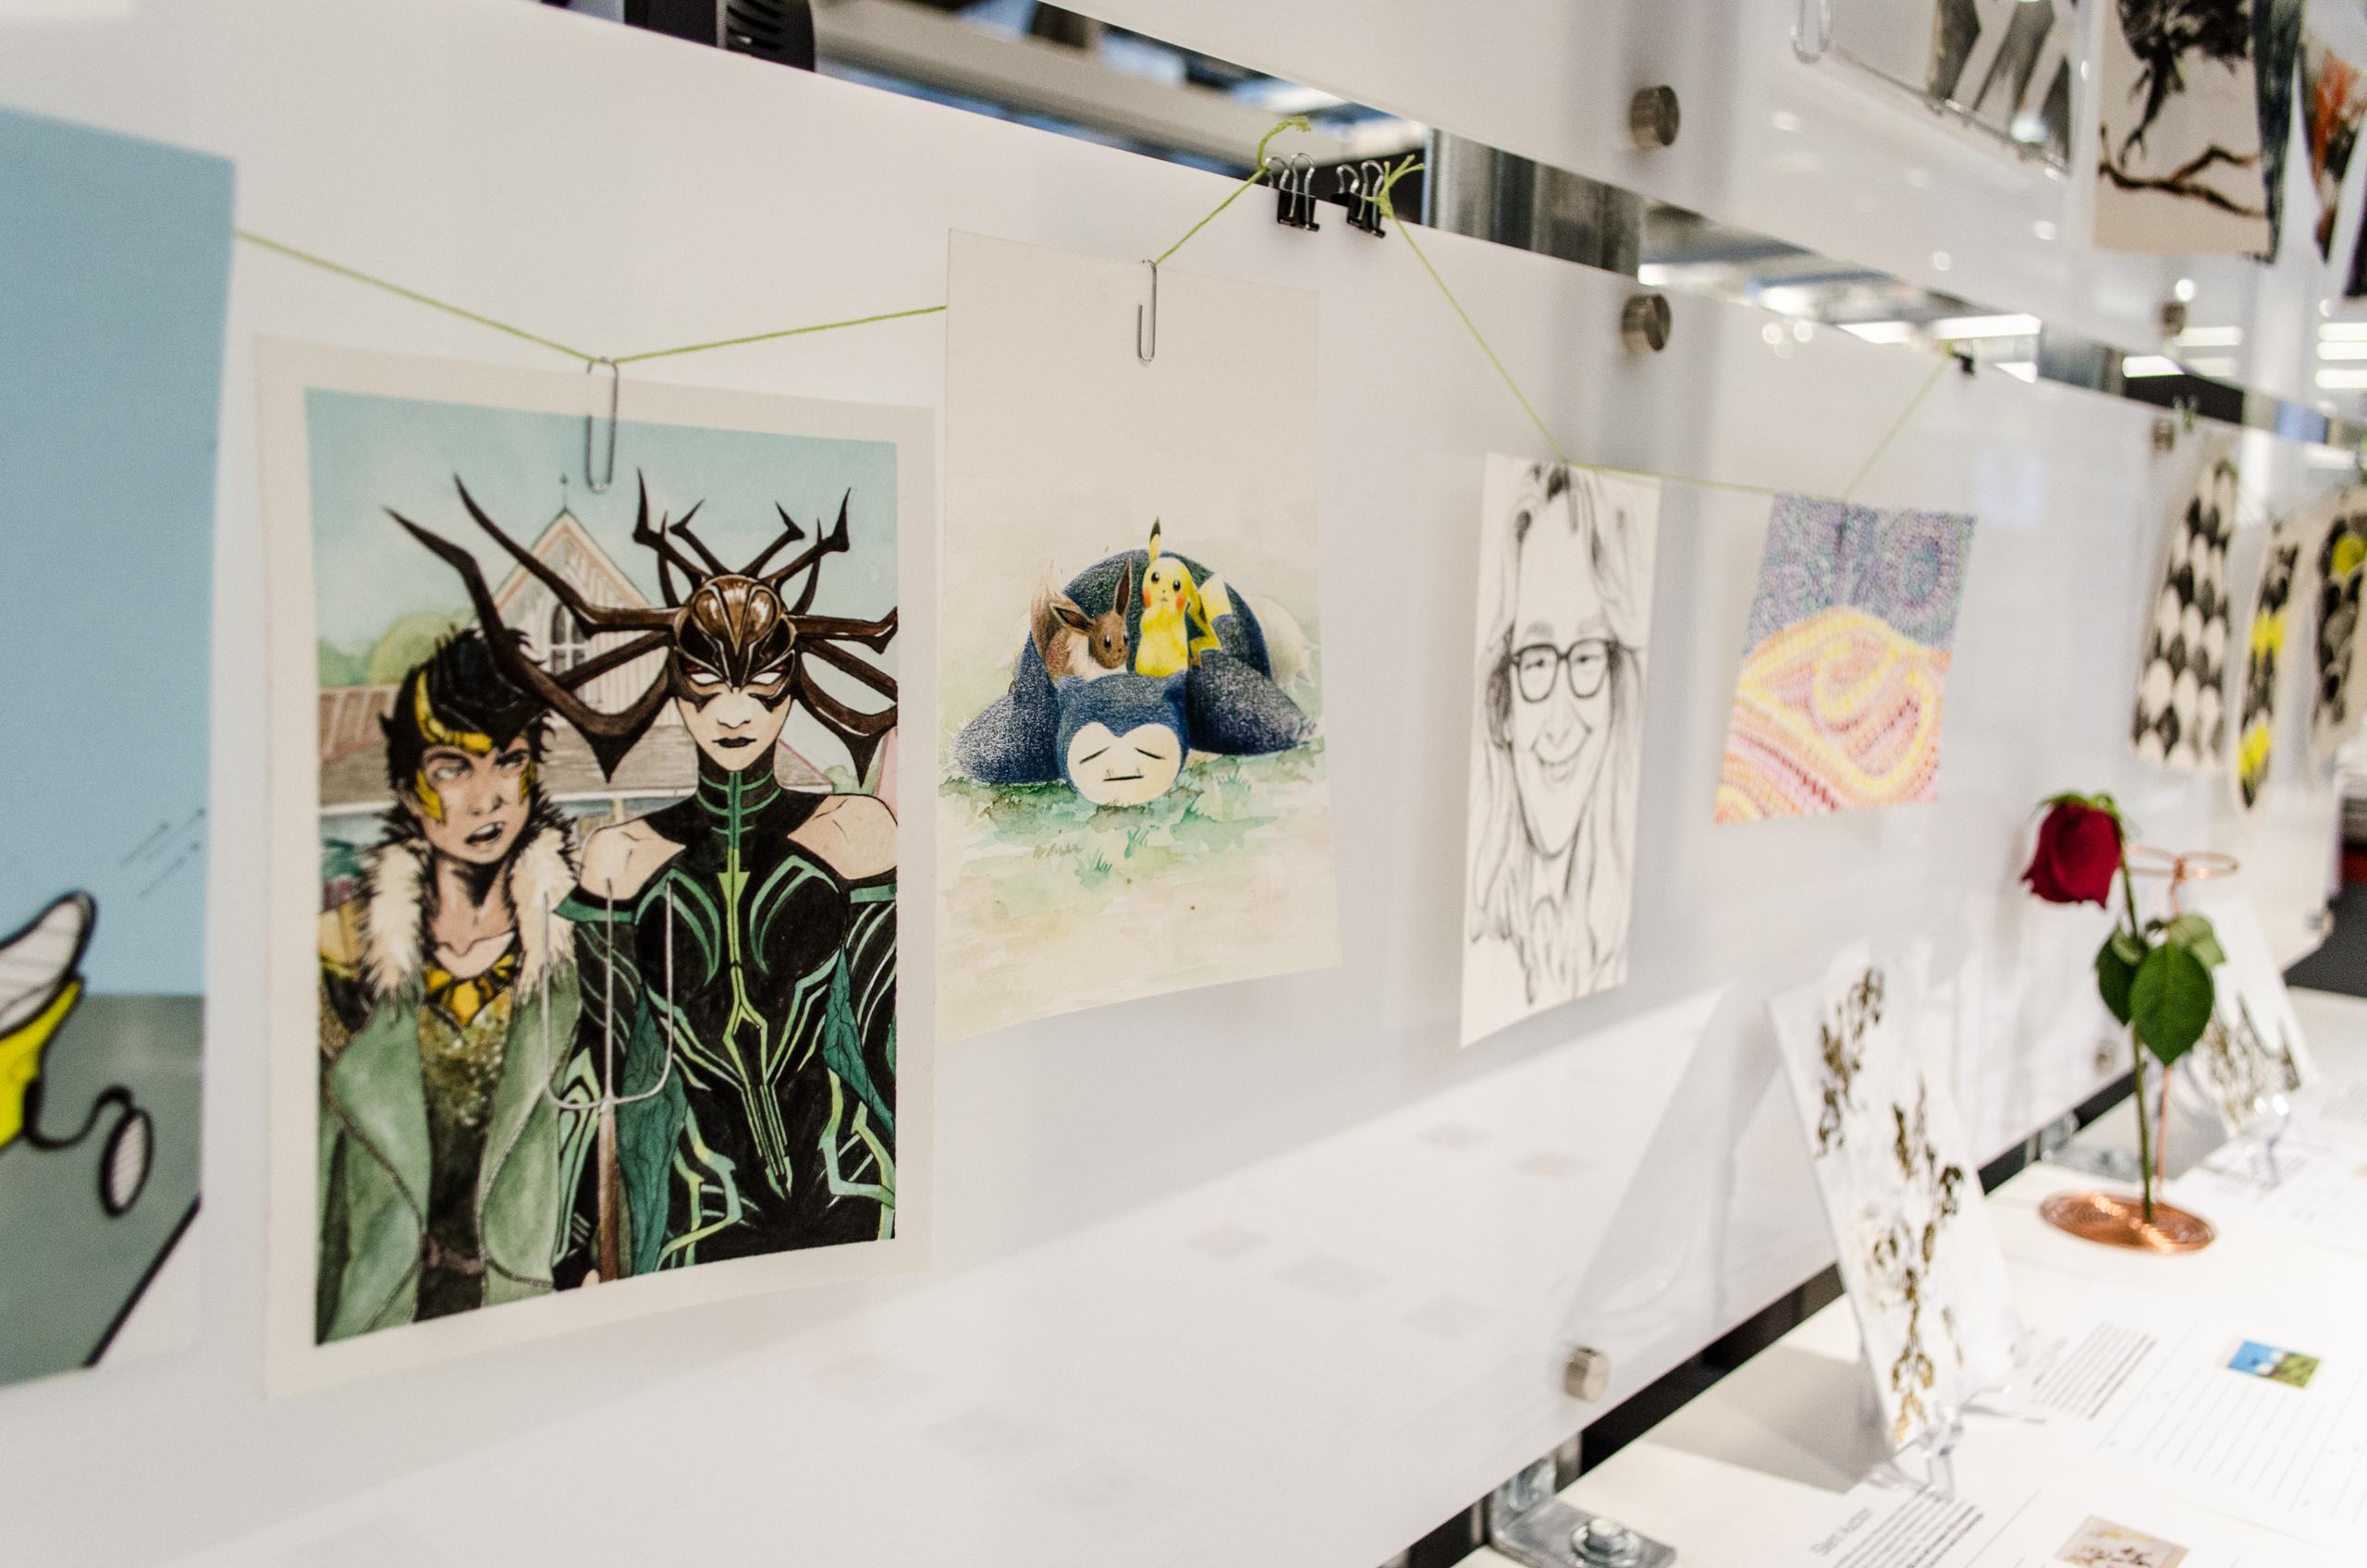 close up of art hung up in the Quadrangle studio showing cartoon paintings and sketches of Pokemon and Avengers characters